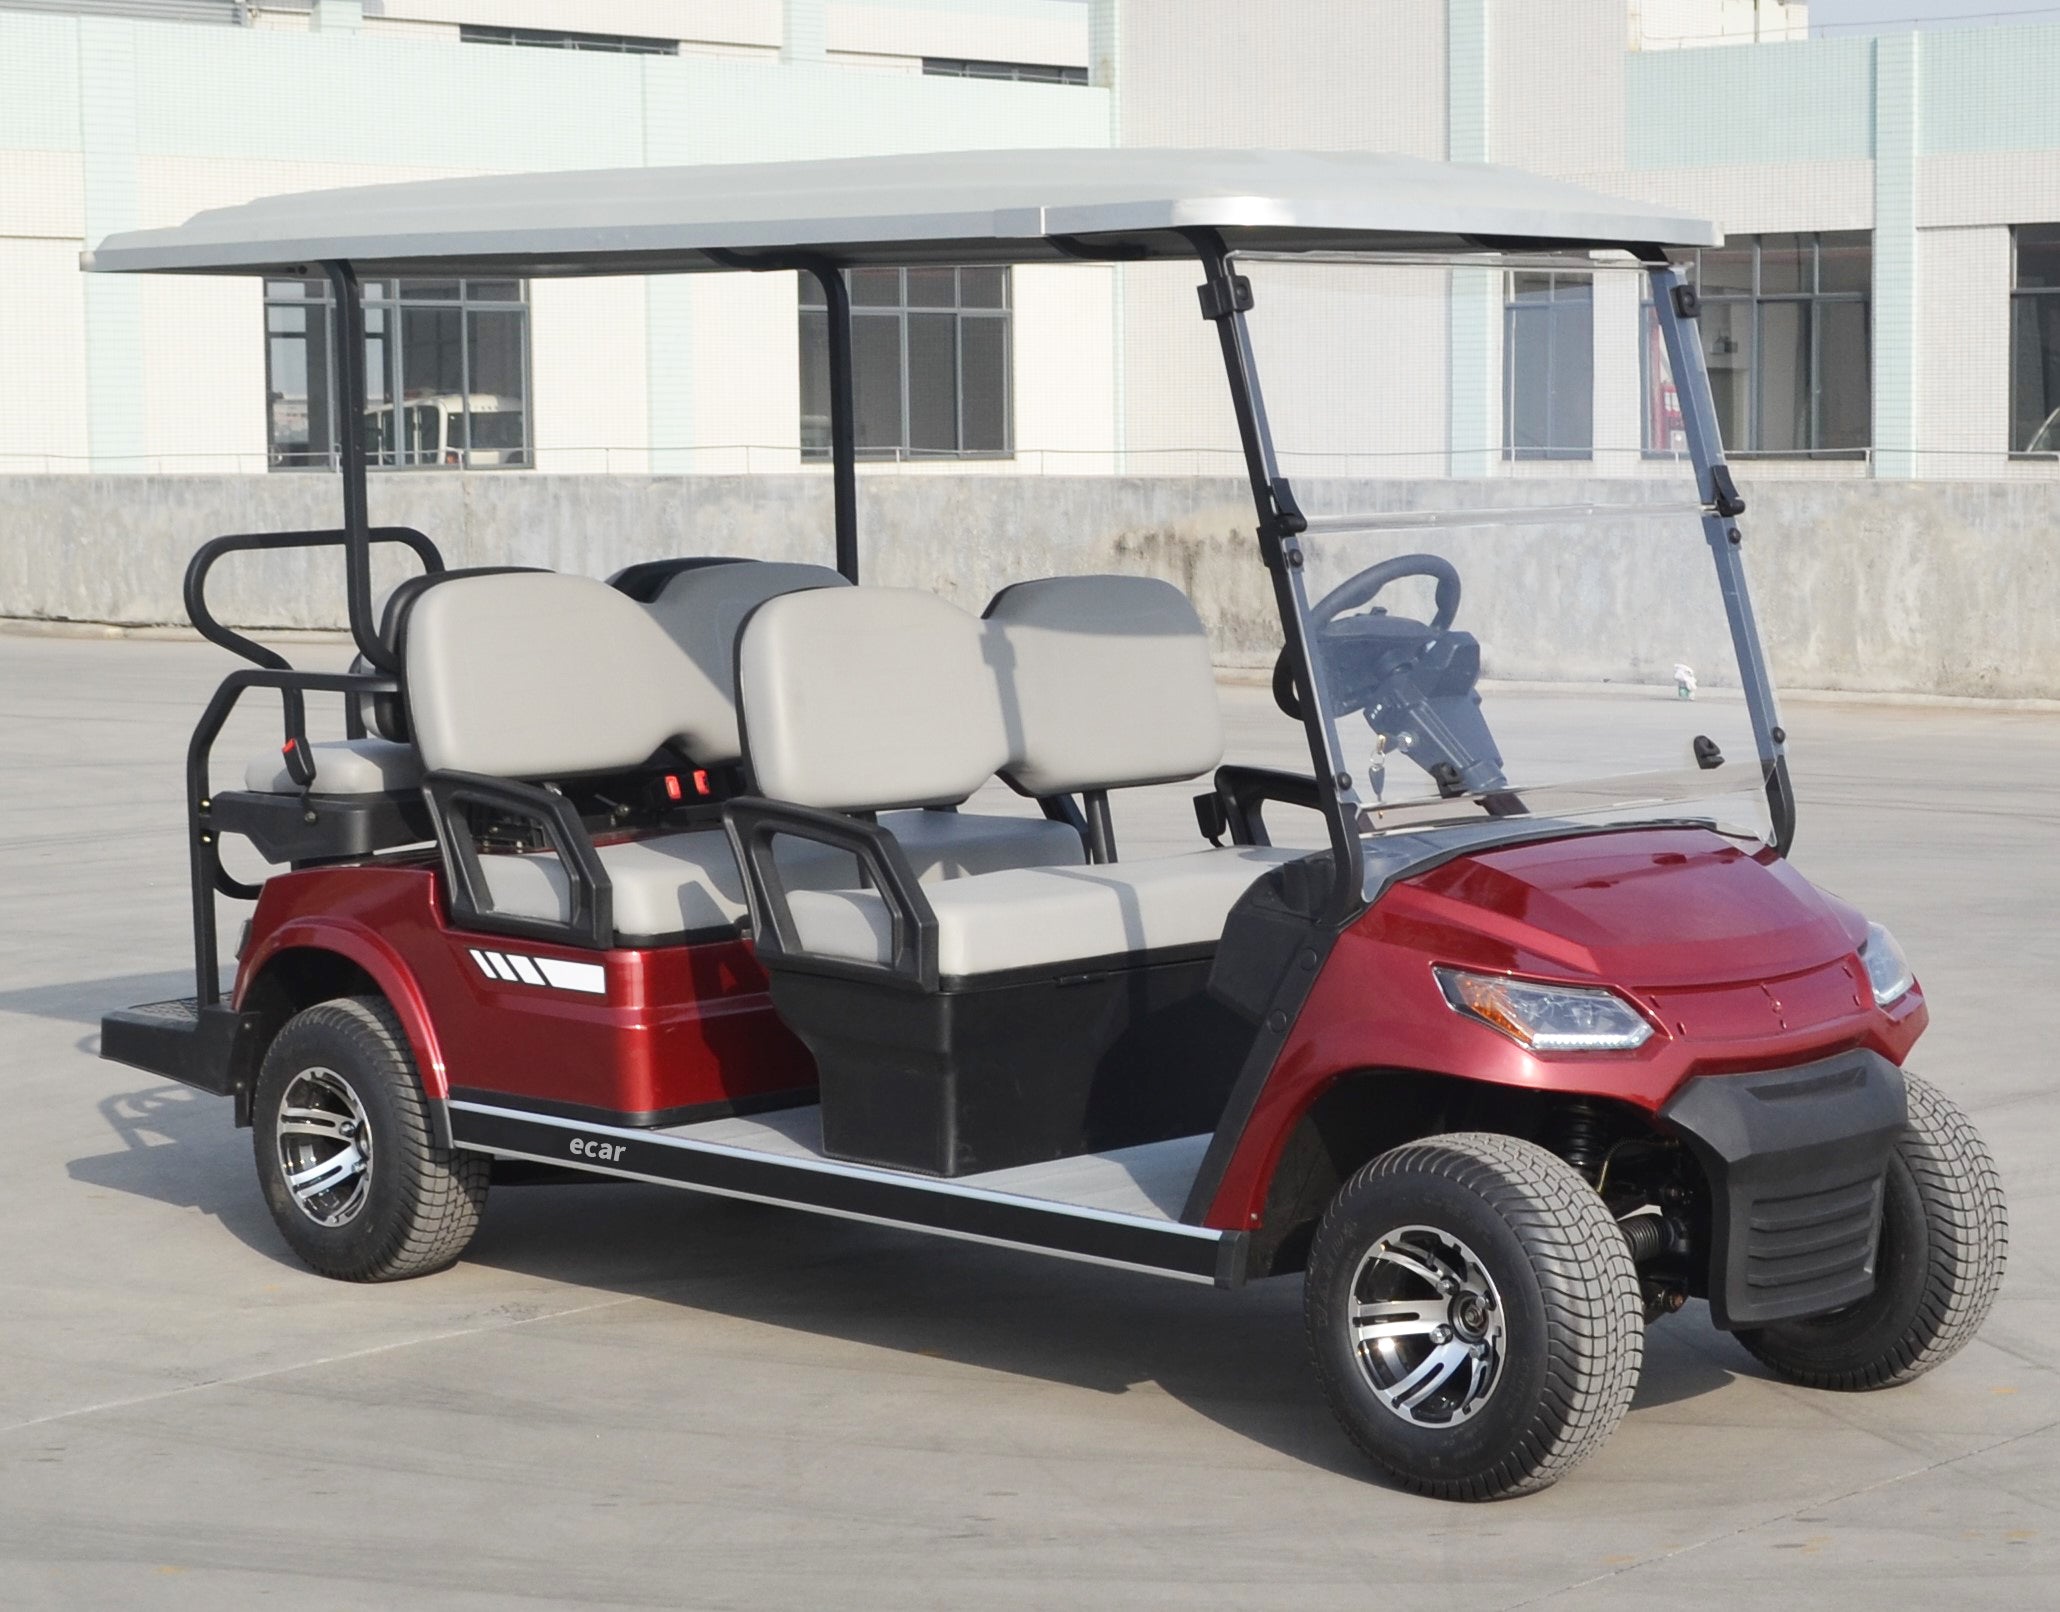 ECAR LT-A827.4+2 - 6 Seaters Golf Cart with Rear Seats